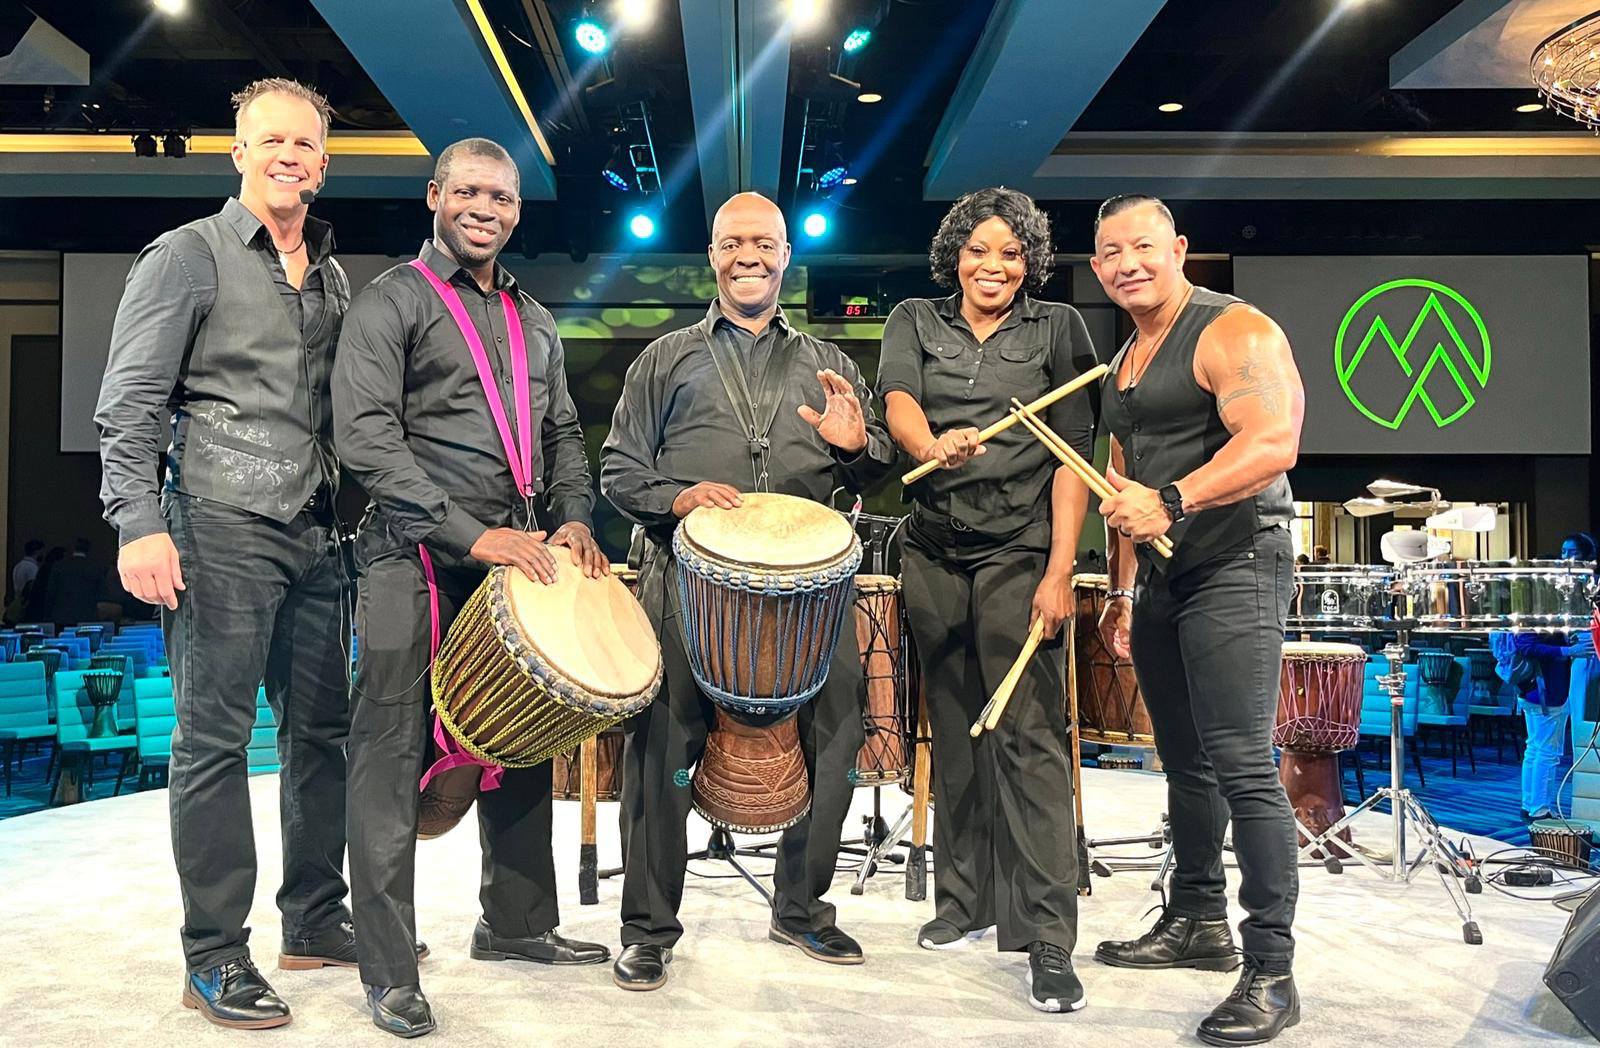 Dale Monnin stands on stage with four others holding drums during a group presentation in a large ballroom.